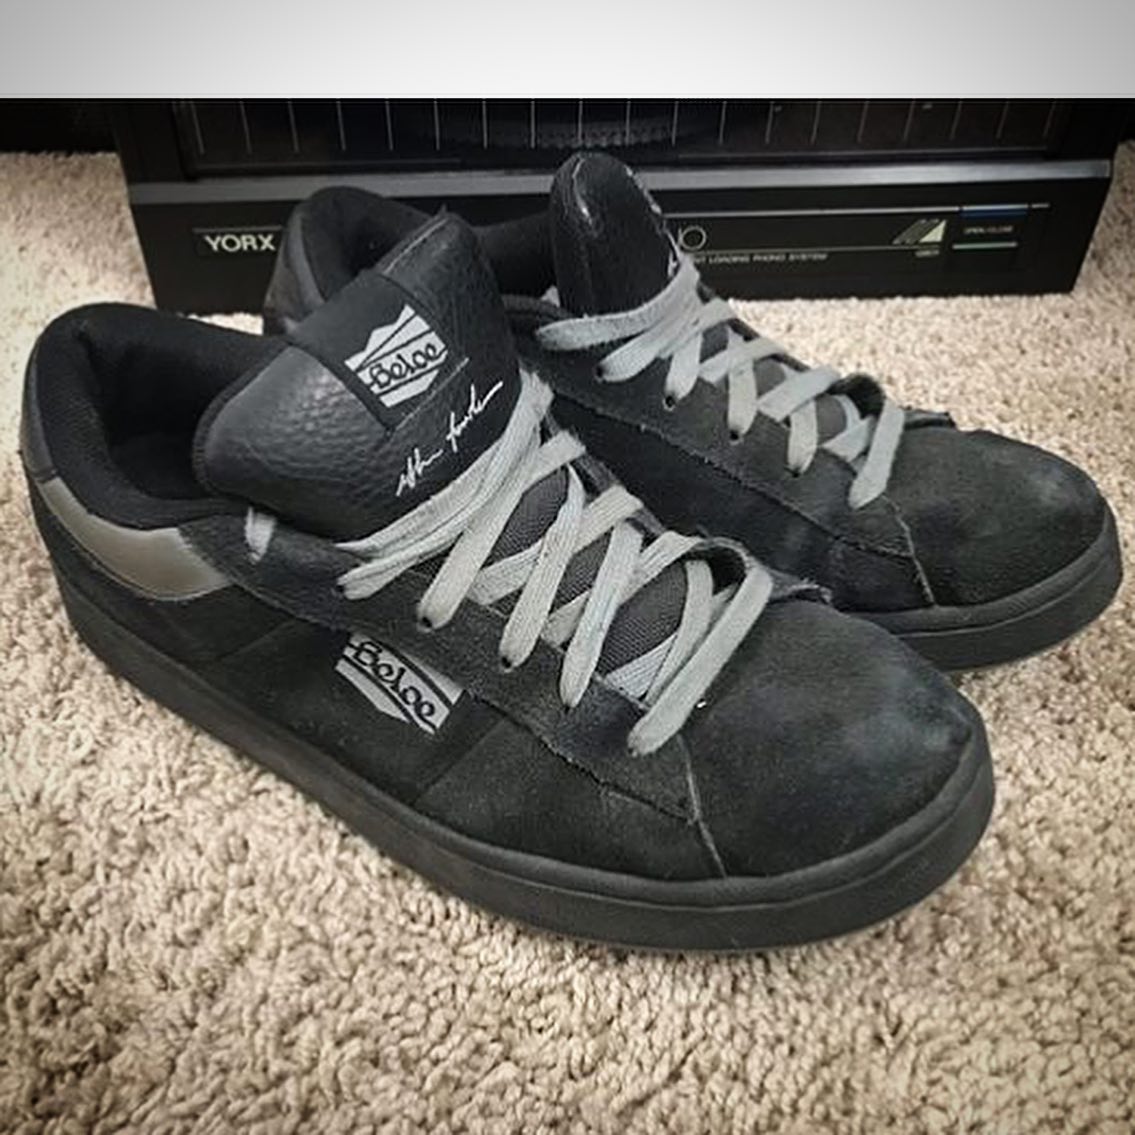 Didn’t even recall this brand.  BELOE per skately was started in 2007 and ended a year later.  Ethan Fowler, Austin Stephens, and Cooper Wilt comprised their skate team.  @nickyblaze187 is selling these size 10.5s  Hit him up if interested in coppin an extremely obscure piece of skate history.  #sk8shoewars